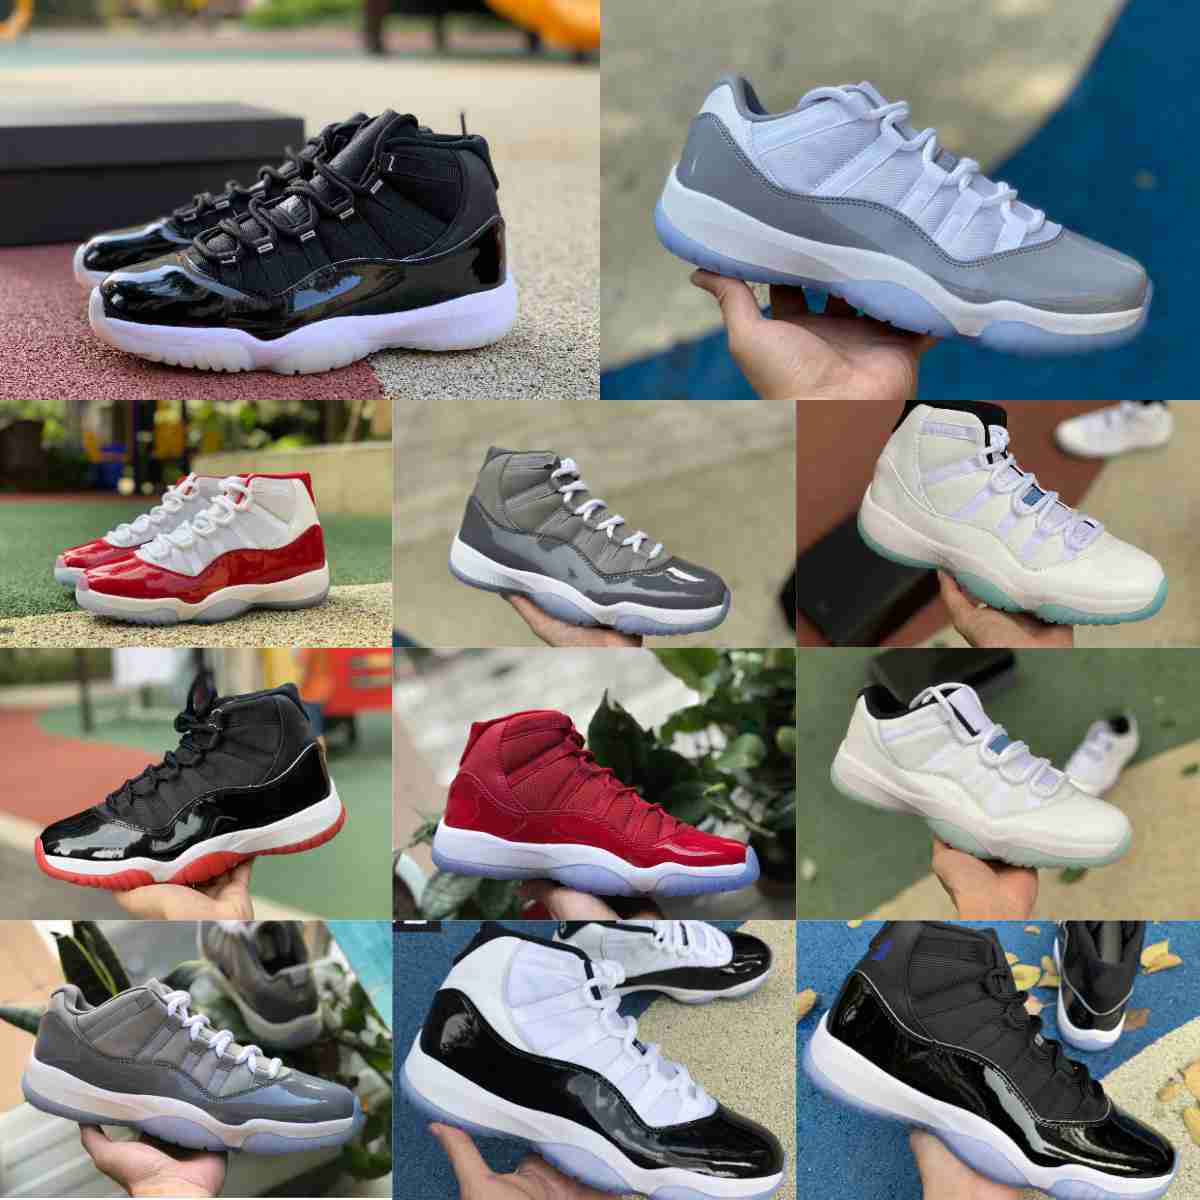 

Jumpman Cherry 11 11s High Basketball Shoes Mens Women Jubilee COOL GREY Cement Grev Playoffs Bred Space Jam Trainer Gamma Blue Concord 45 Low Designers Sneakers S8, Please contact us